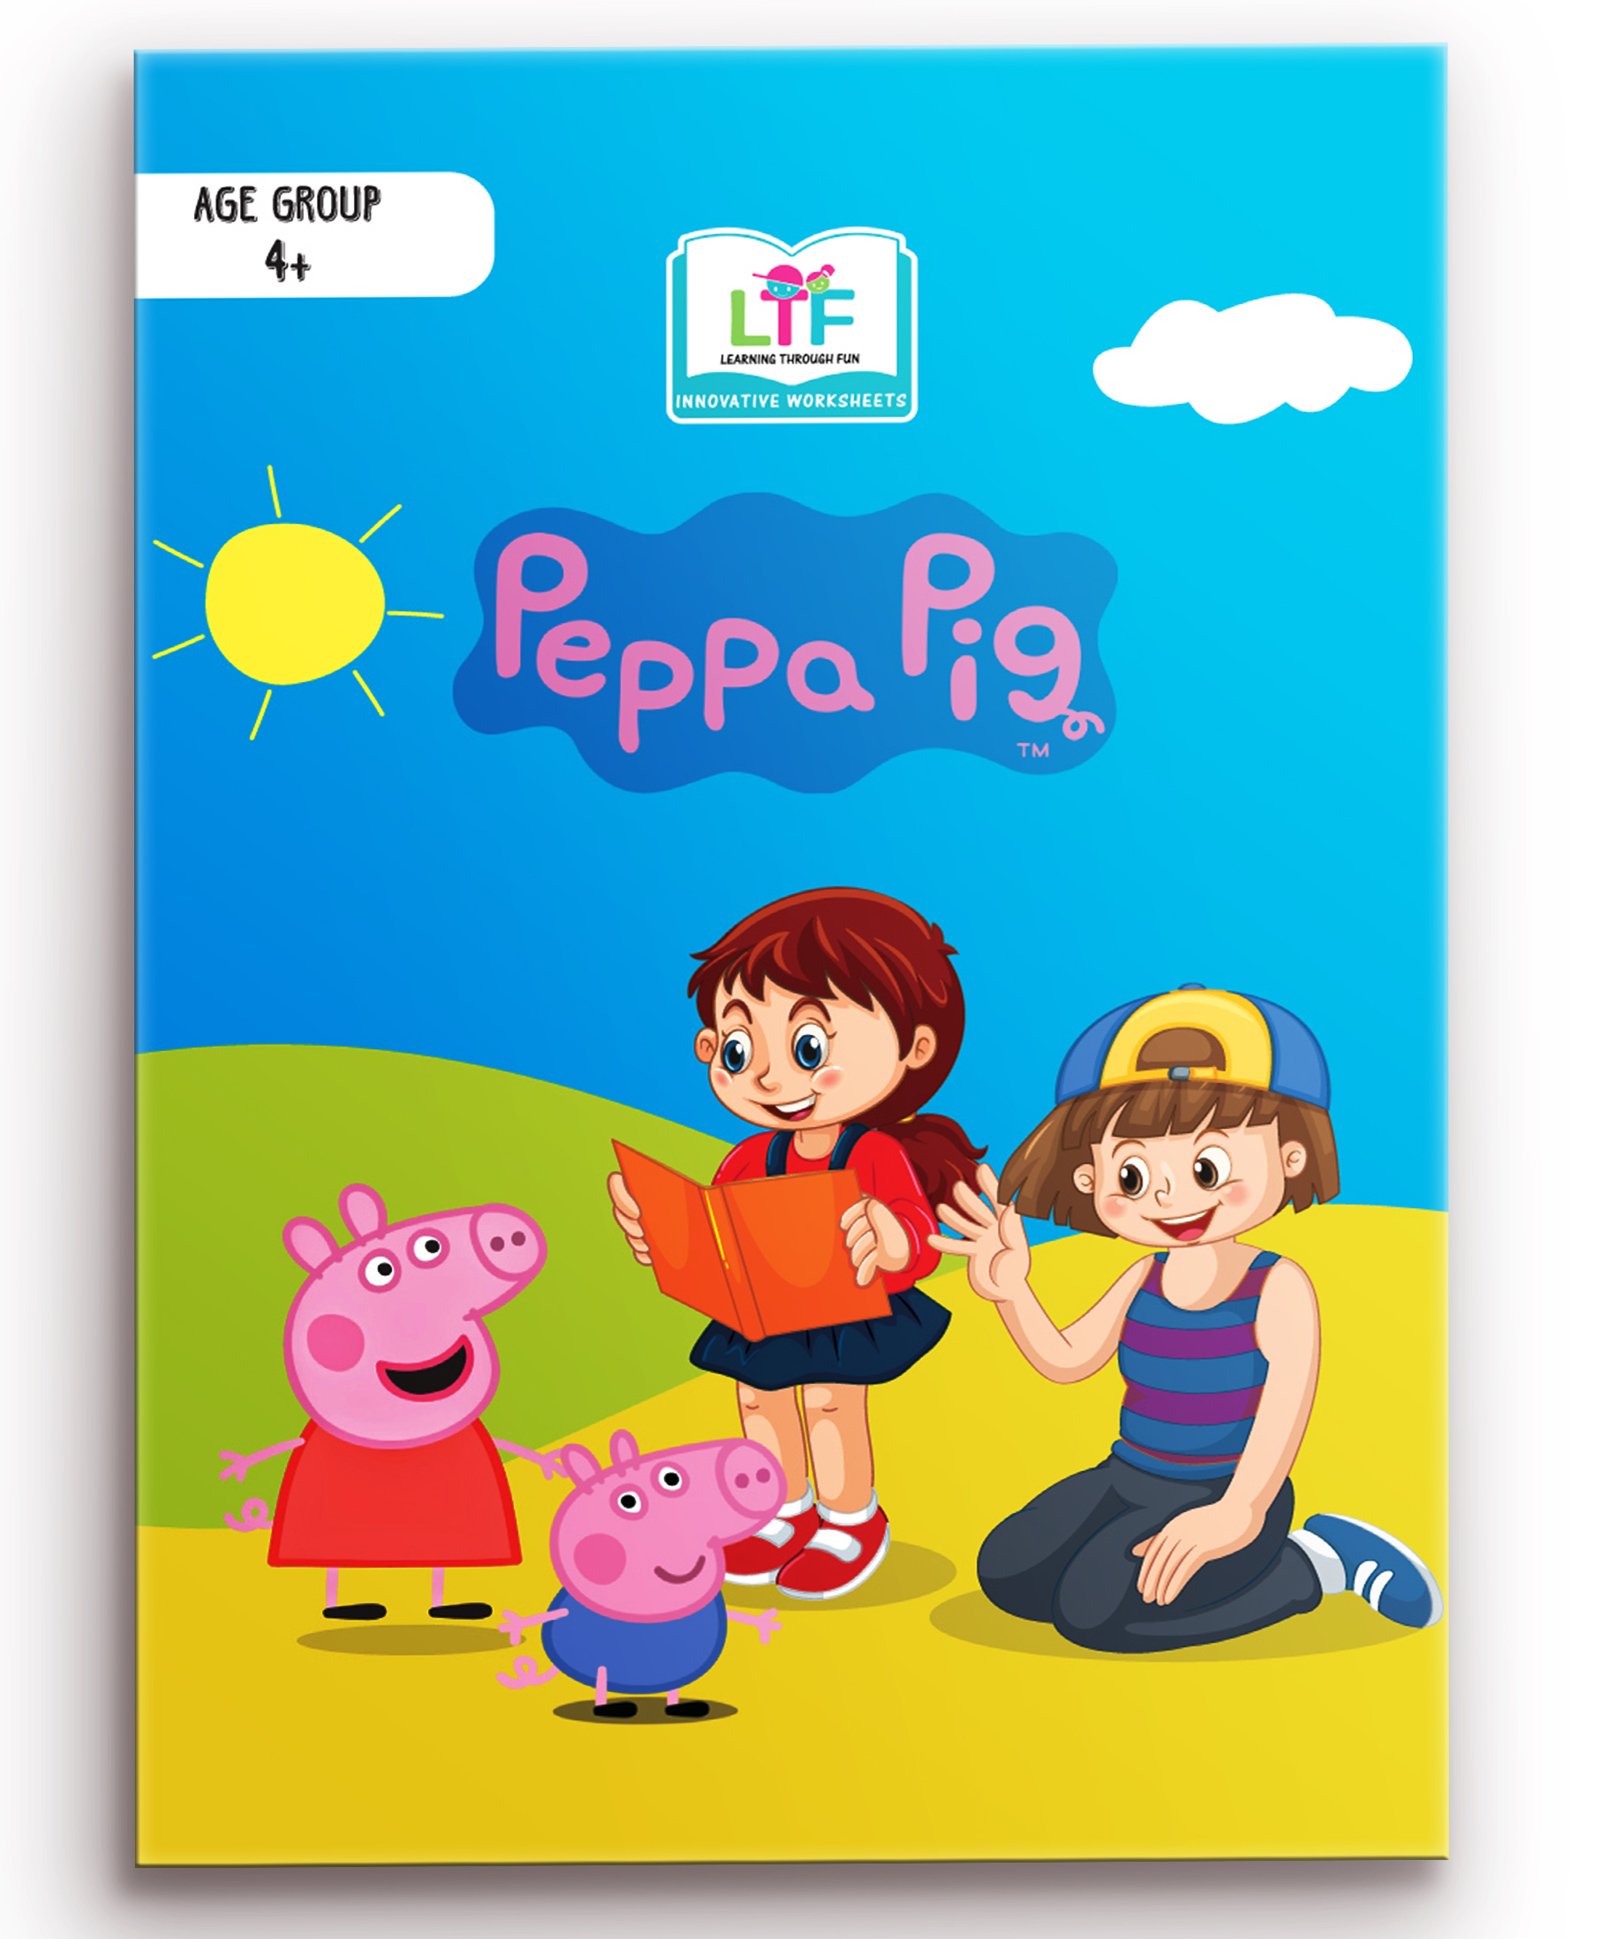 Learning Through Fun Peppa Pig Activity Book - English Online in India, Buy  at Best Price from  - 8778202